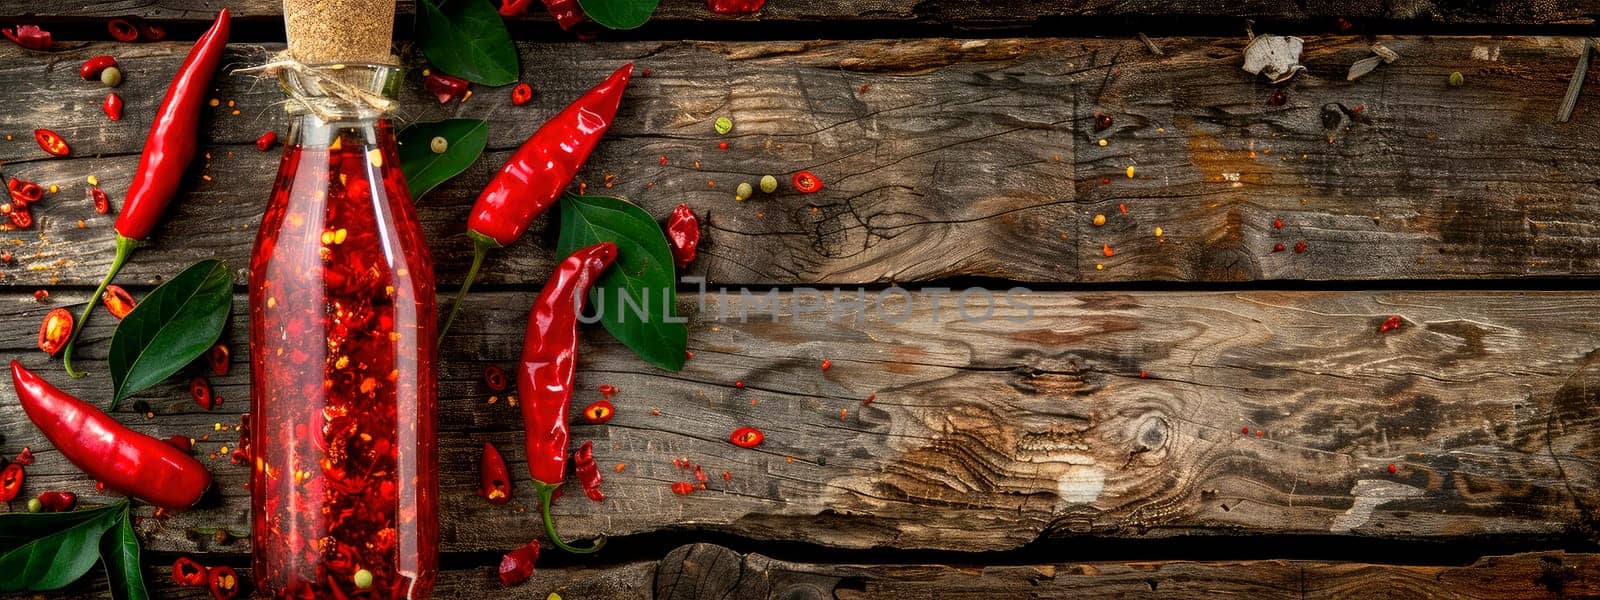 chili pepper essential oil in a bottle. Selective focus. by yanadjana